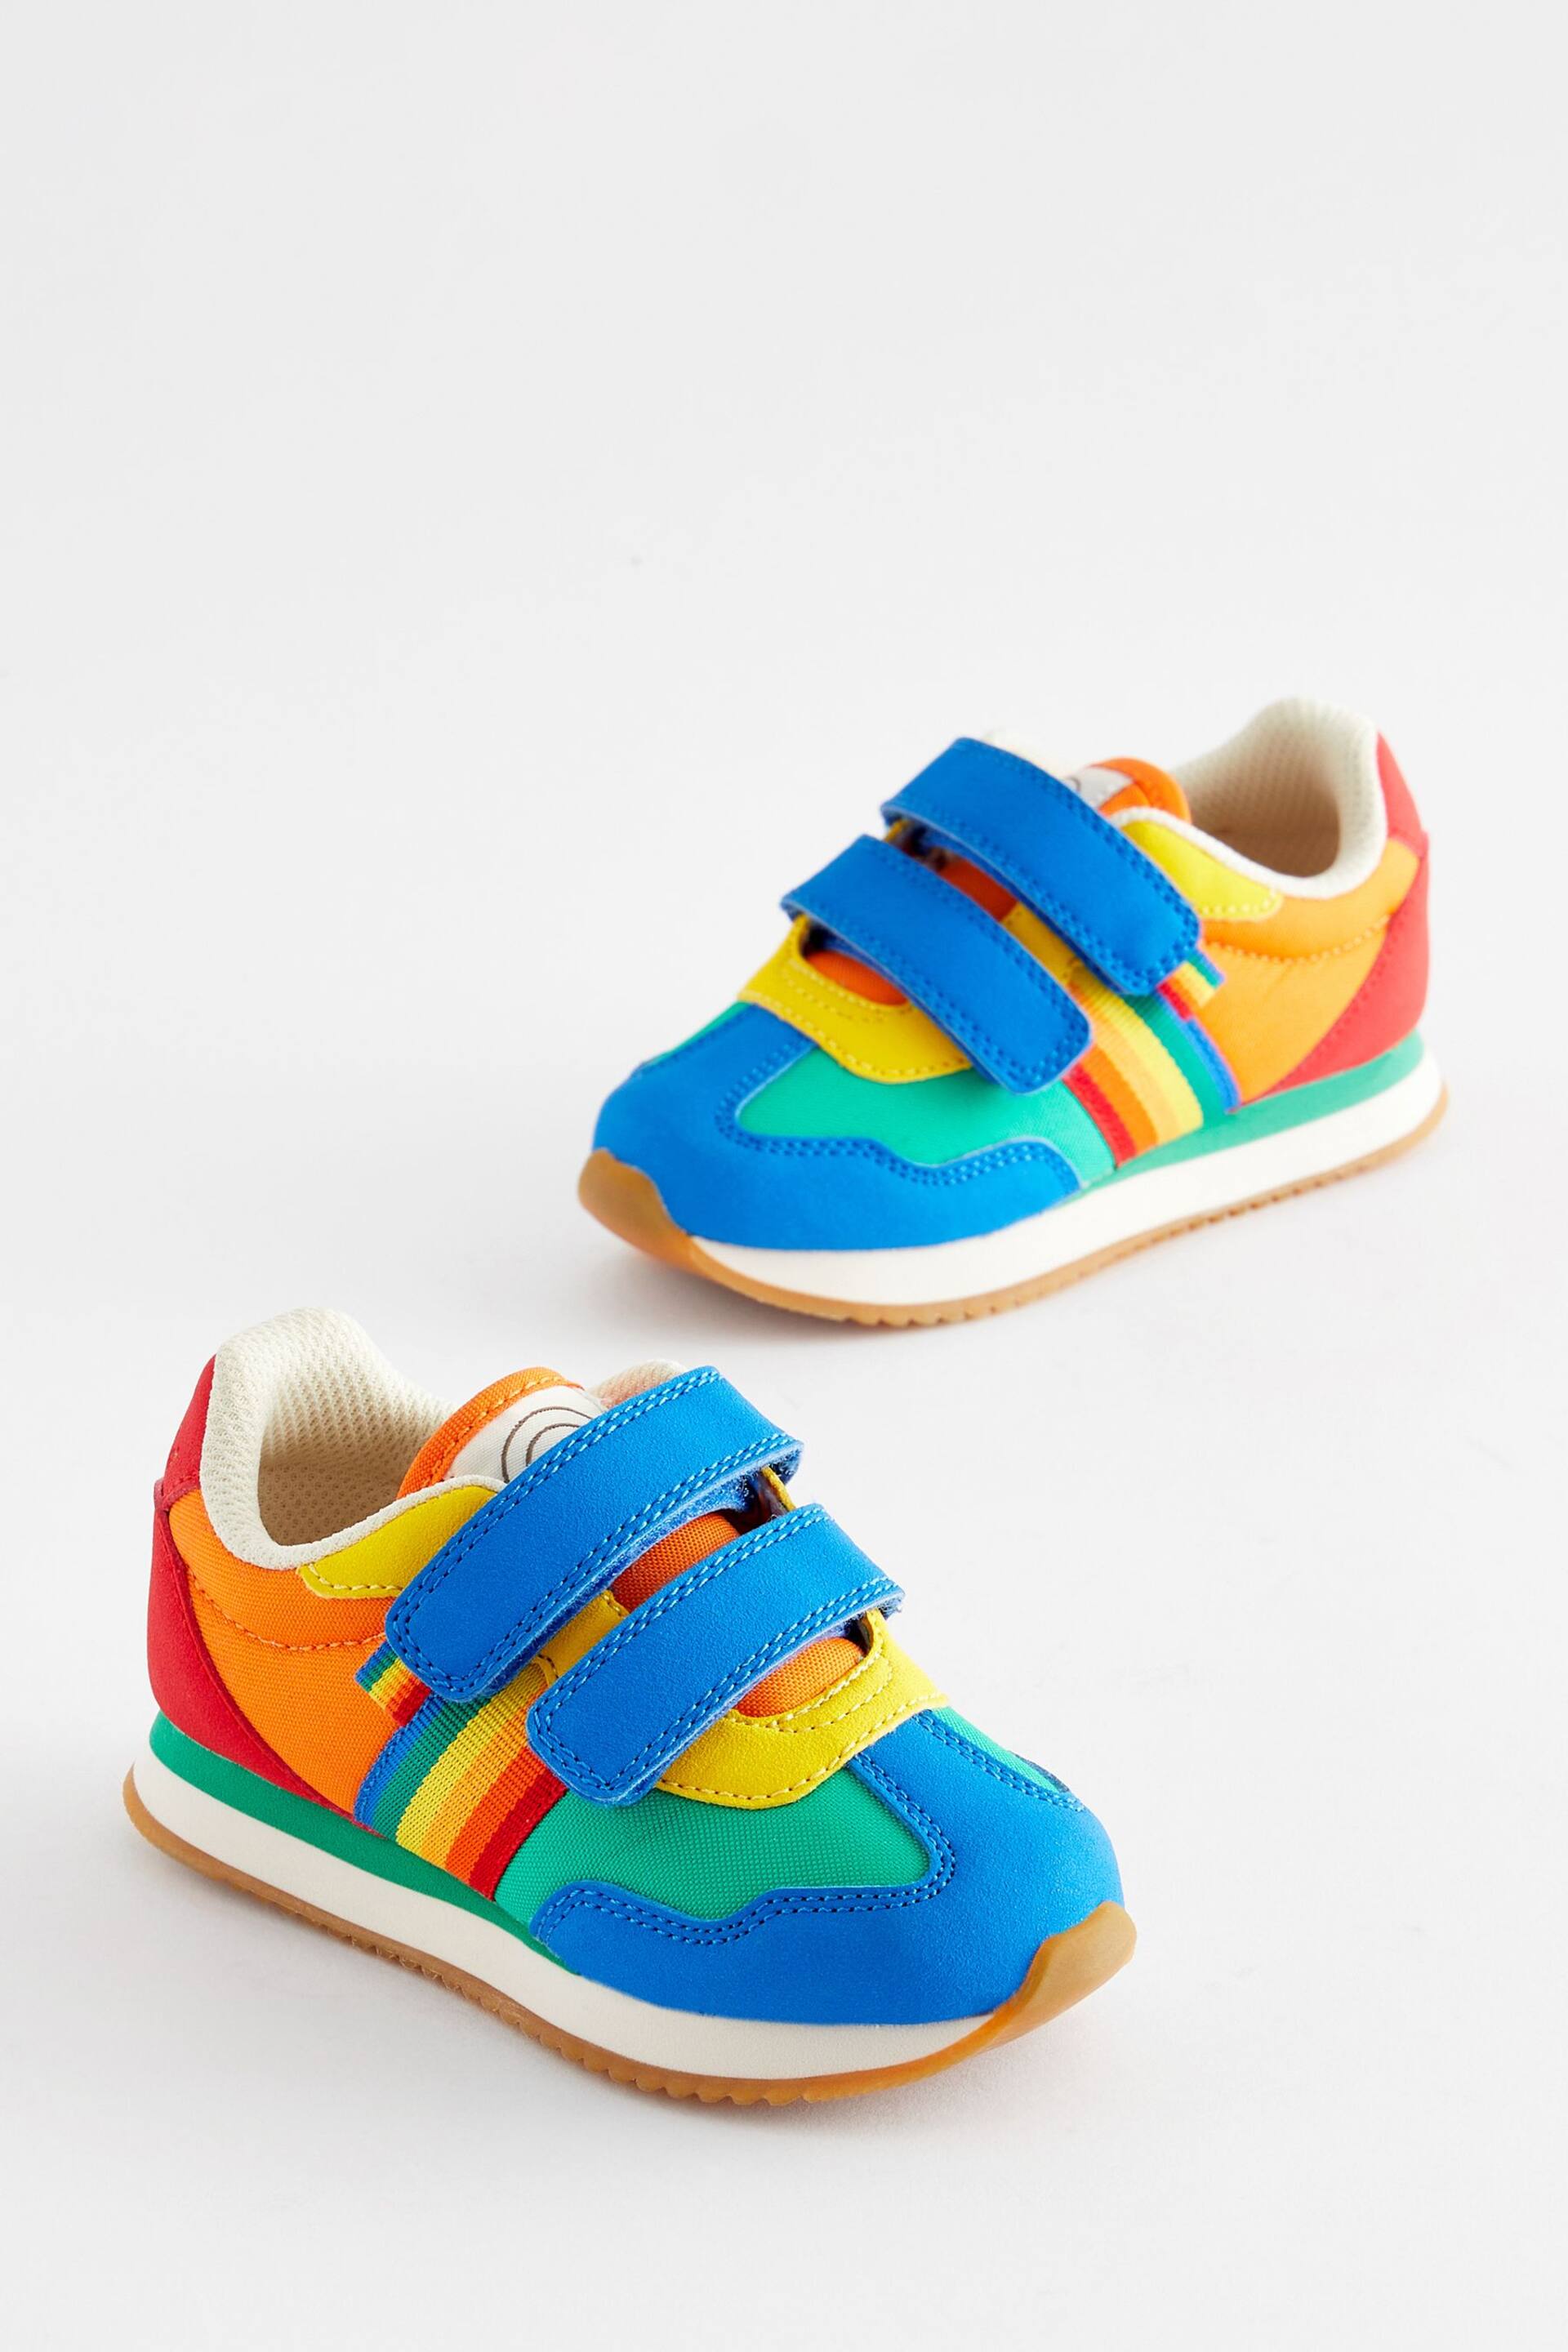 Little Bird by Jools Oliver Multi Bright Younger Colourful Rainbow Retro Runner Trainers - Image 1 of 6